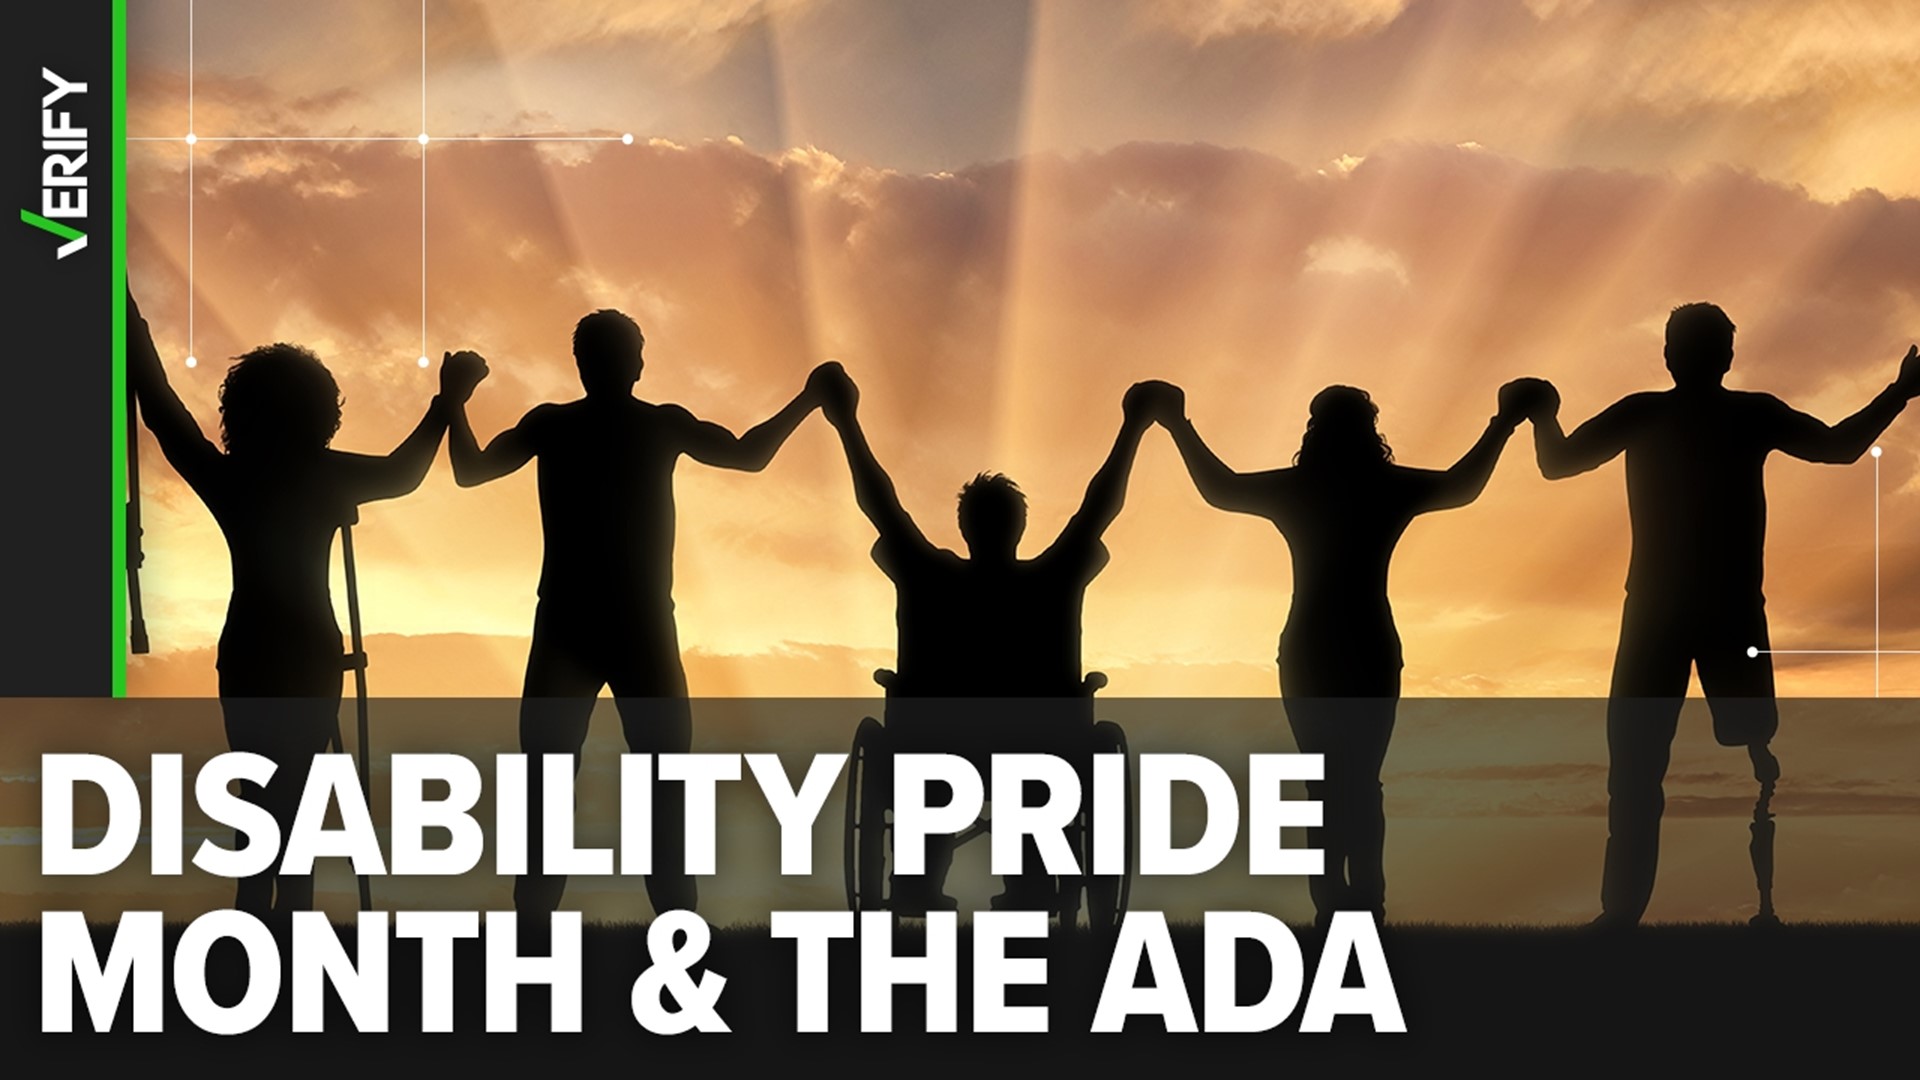 In the U.S., July is Disability Pride Month, recognizing the signing of ADA, & the history, achievements, experiences and struggles within the disability community.